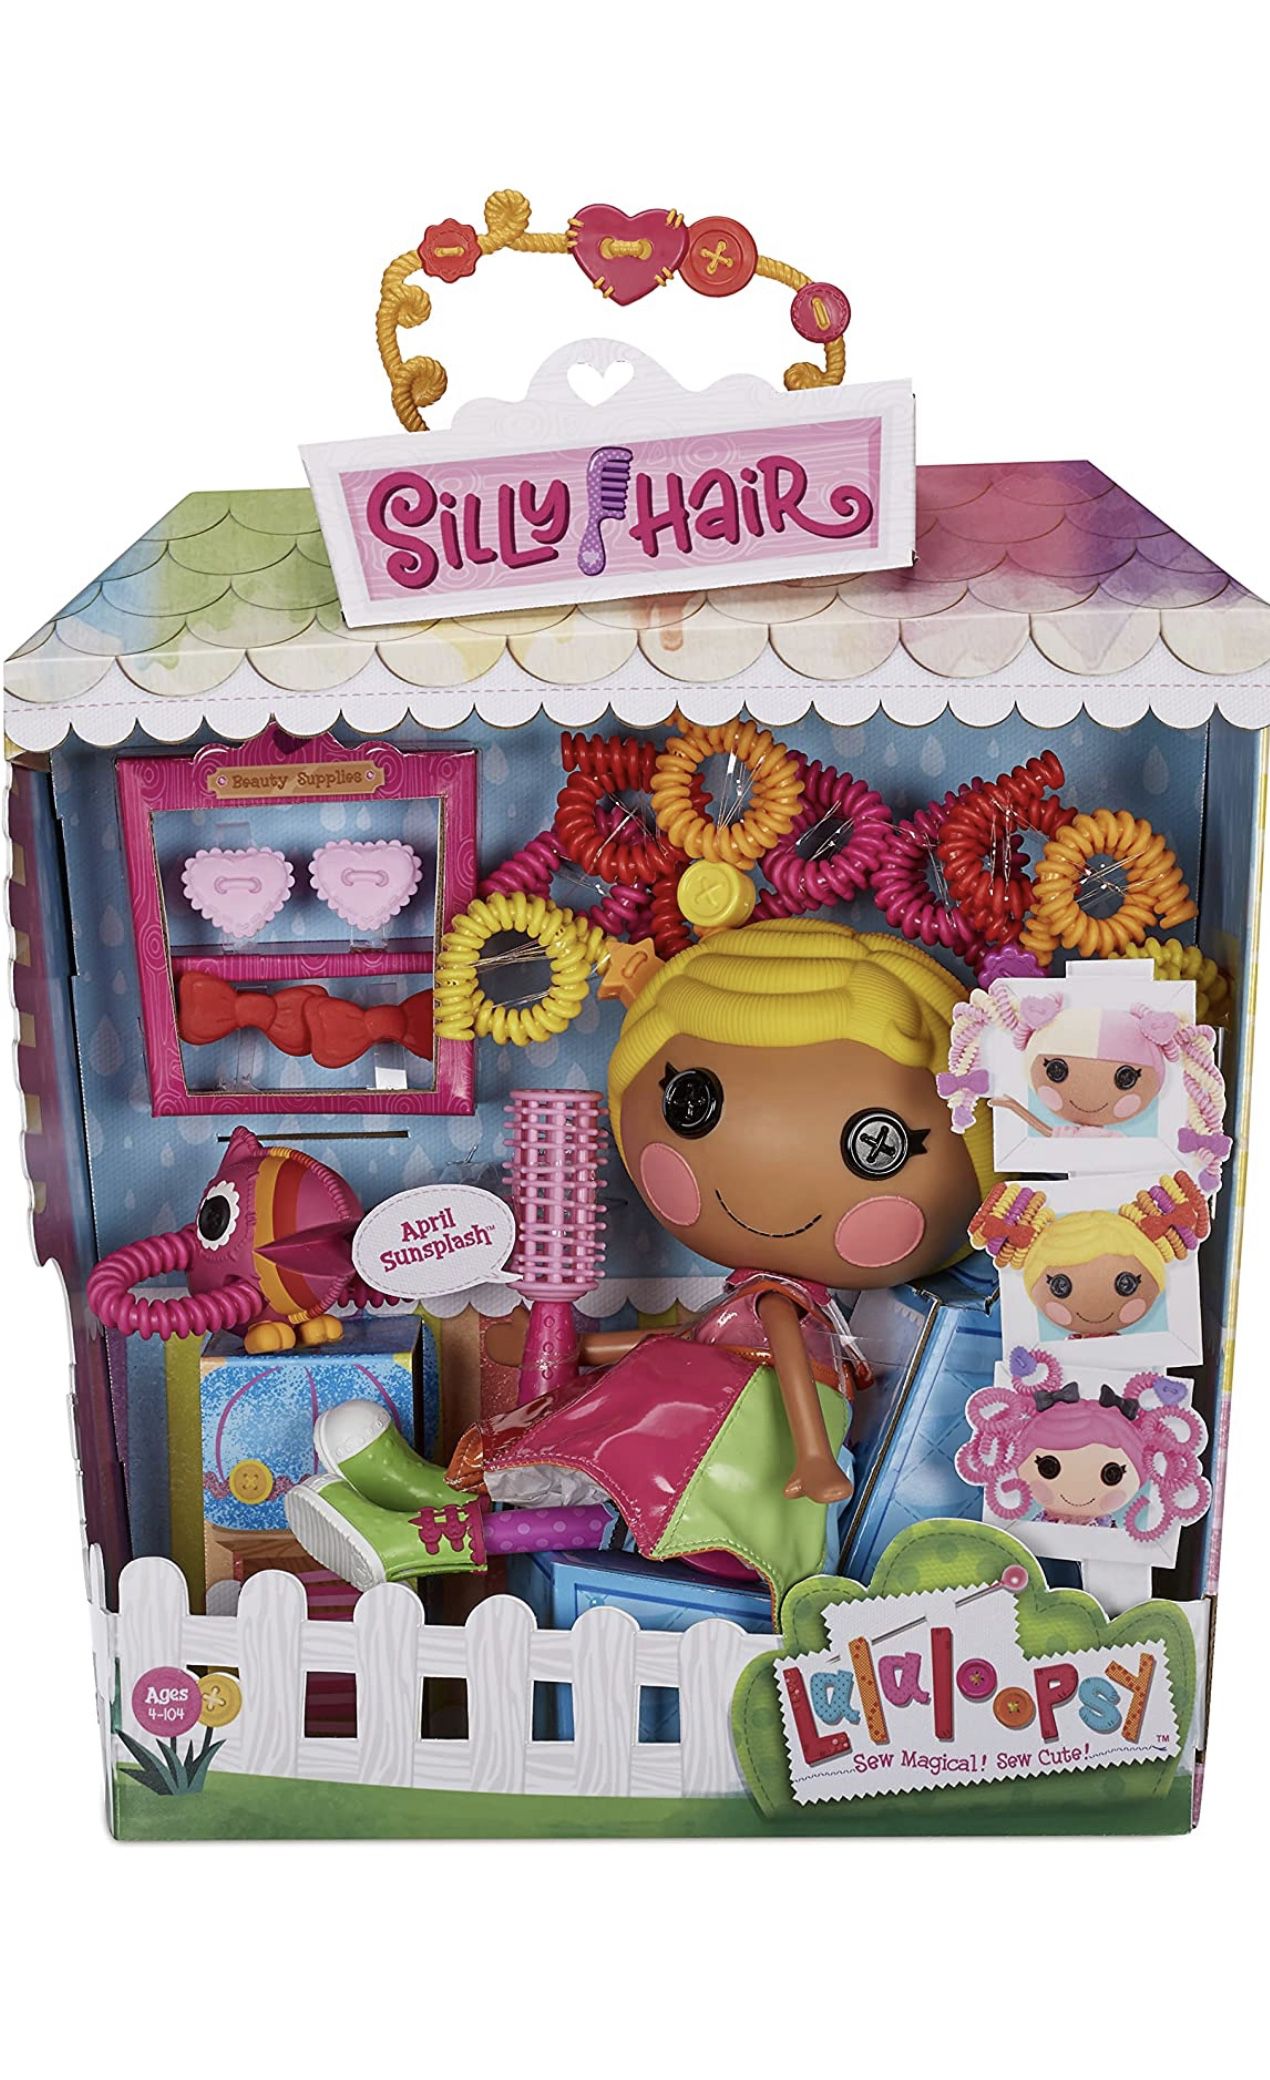 Lalaloopsy Silly Hair Doll- April Sunsplash & Pet Toucan, 13" Rainbow Hair Styling Doll with Multicolor Outfit & 11 Accessories, Reusable Salon Playse